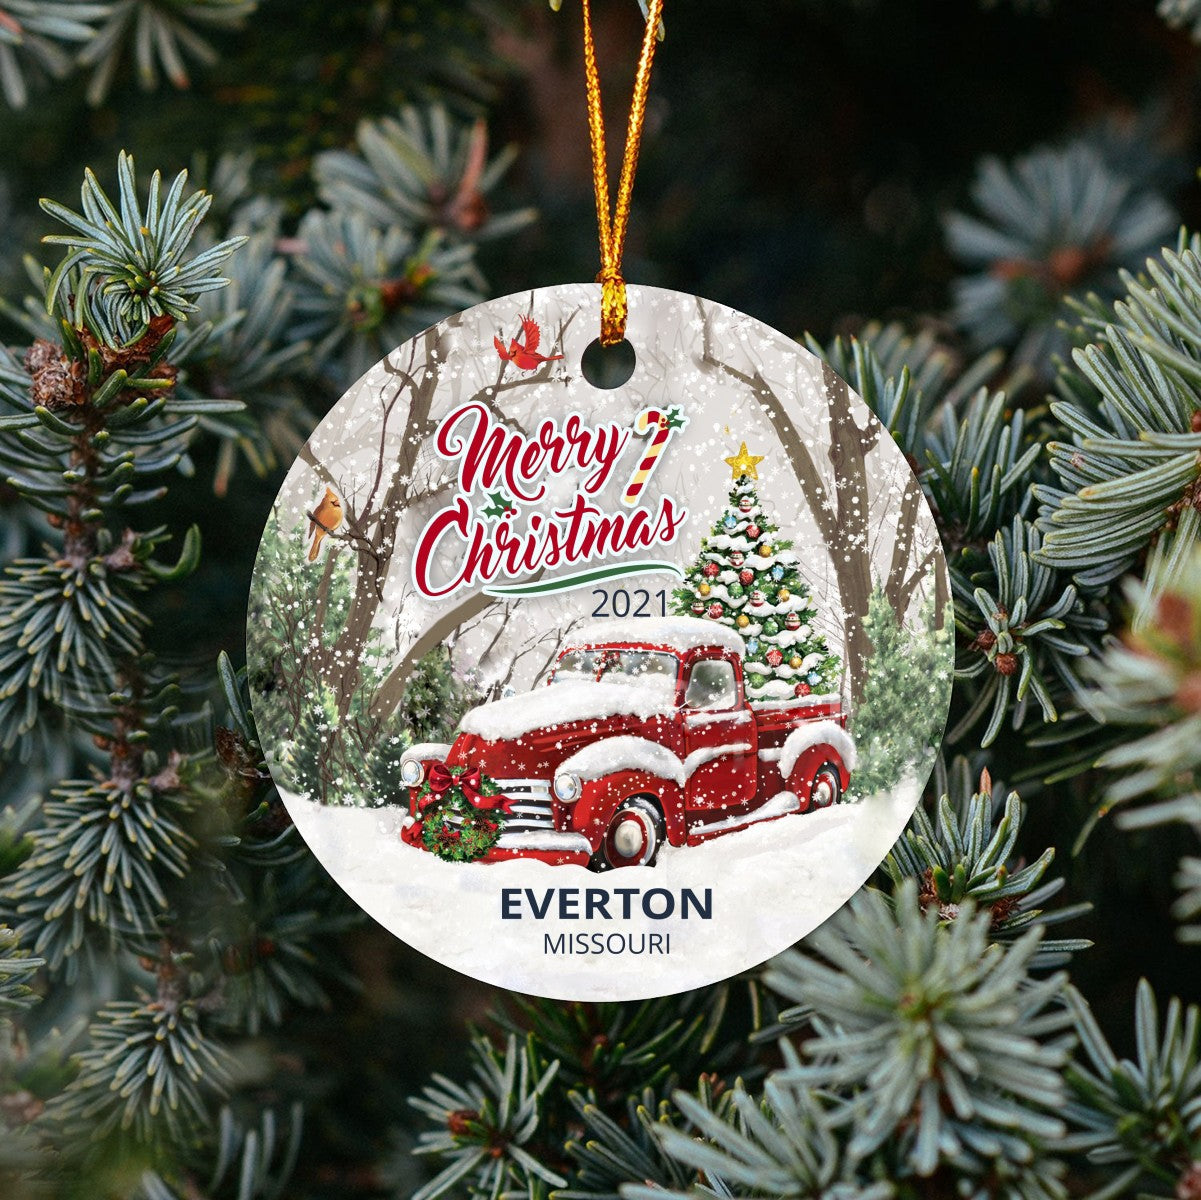 Christmas Tree Ornaments Everton - Ornament With Name City, State Everton Missouri MO Ornament - Red Truck Xmas Ornaments 3'' Plastic Gift For Family, Friend And Housewarming